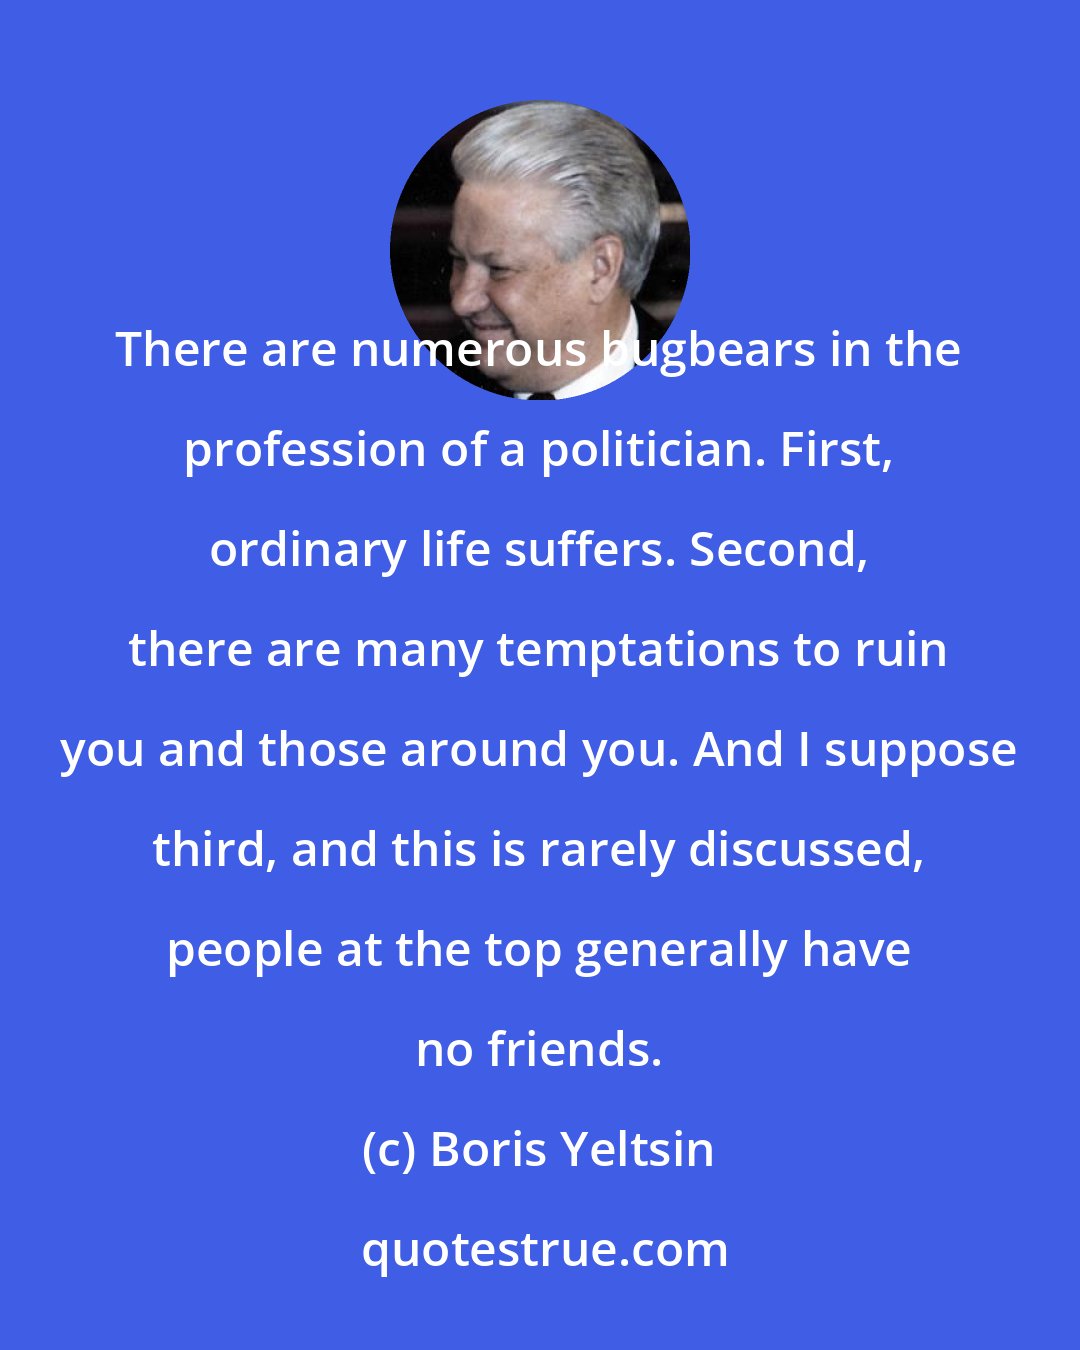 Boris Yeltsin: There are numerous bugbears in the profession of a politician. First, ordinary life suffers. Second, there are many temptations to ruin you and those around you. And I suppose third, and this is rarely discussed, people at the top generally have no friends.